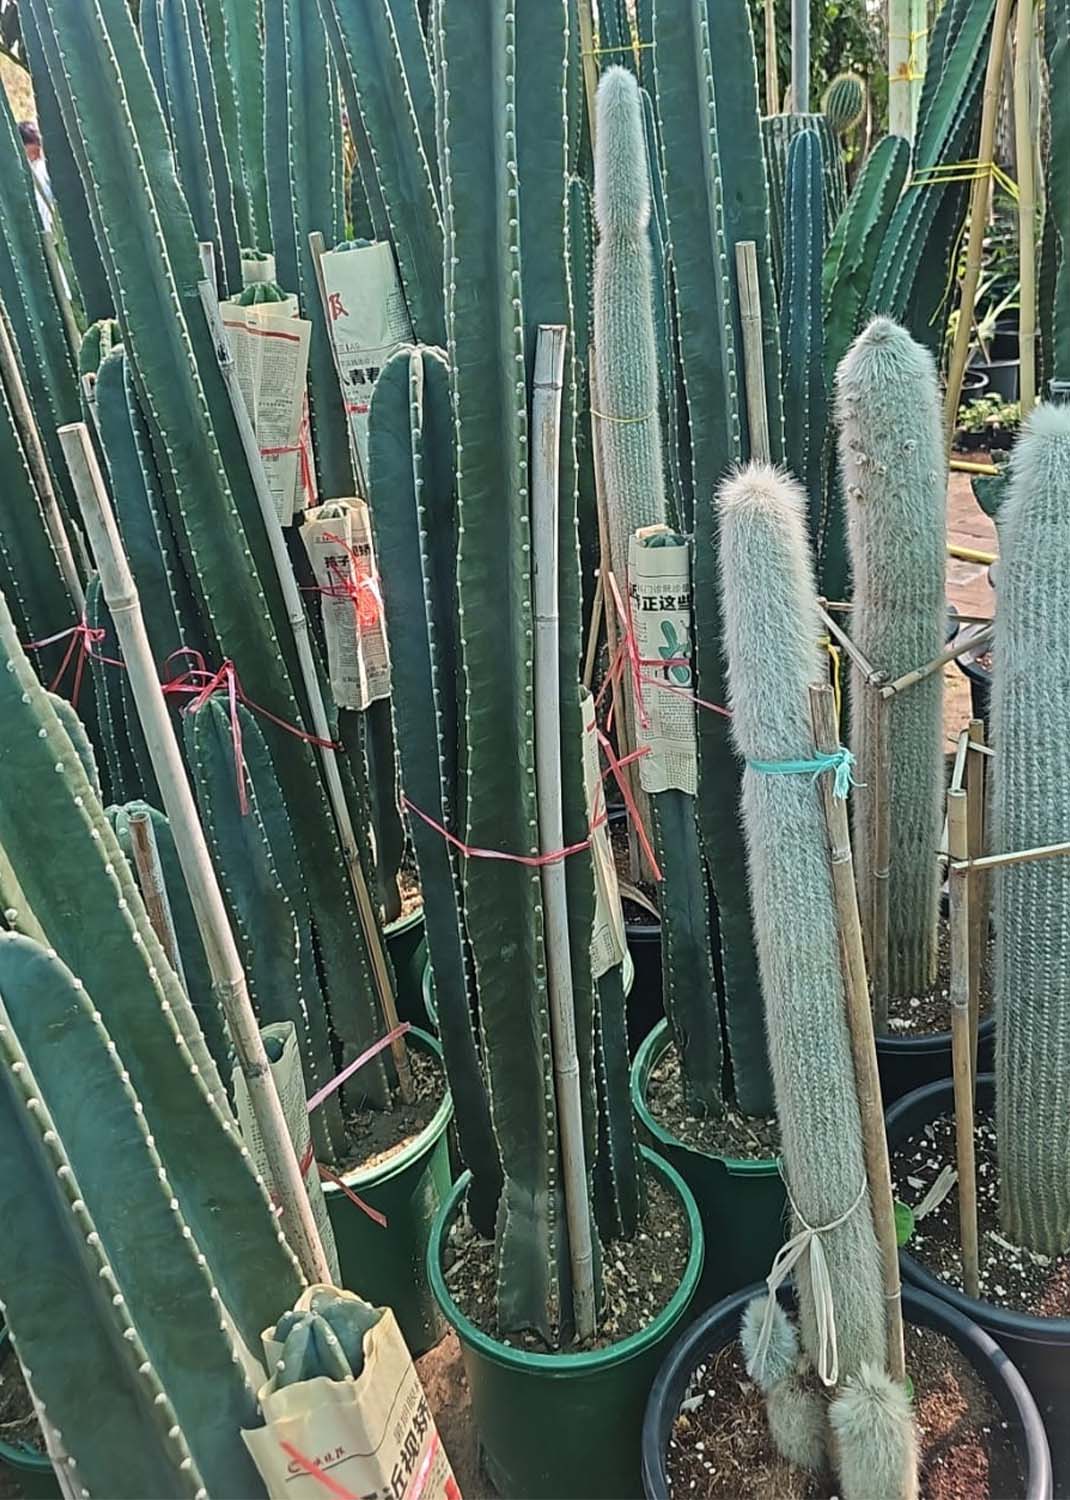 Cactus outdoor with more than 2m hights